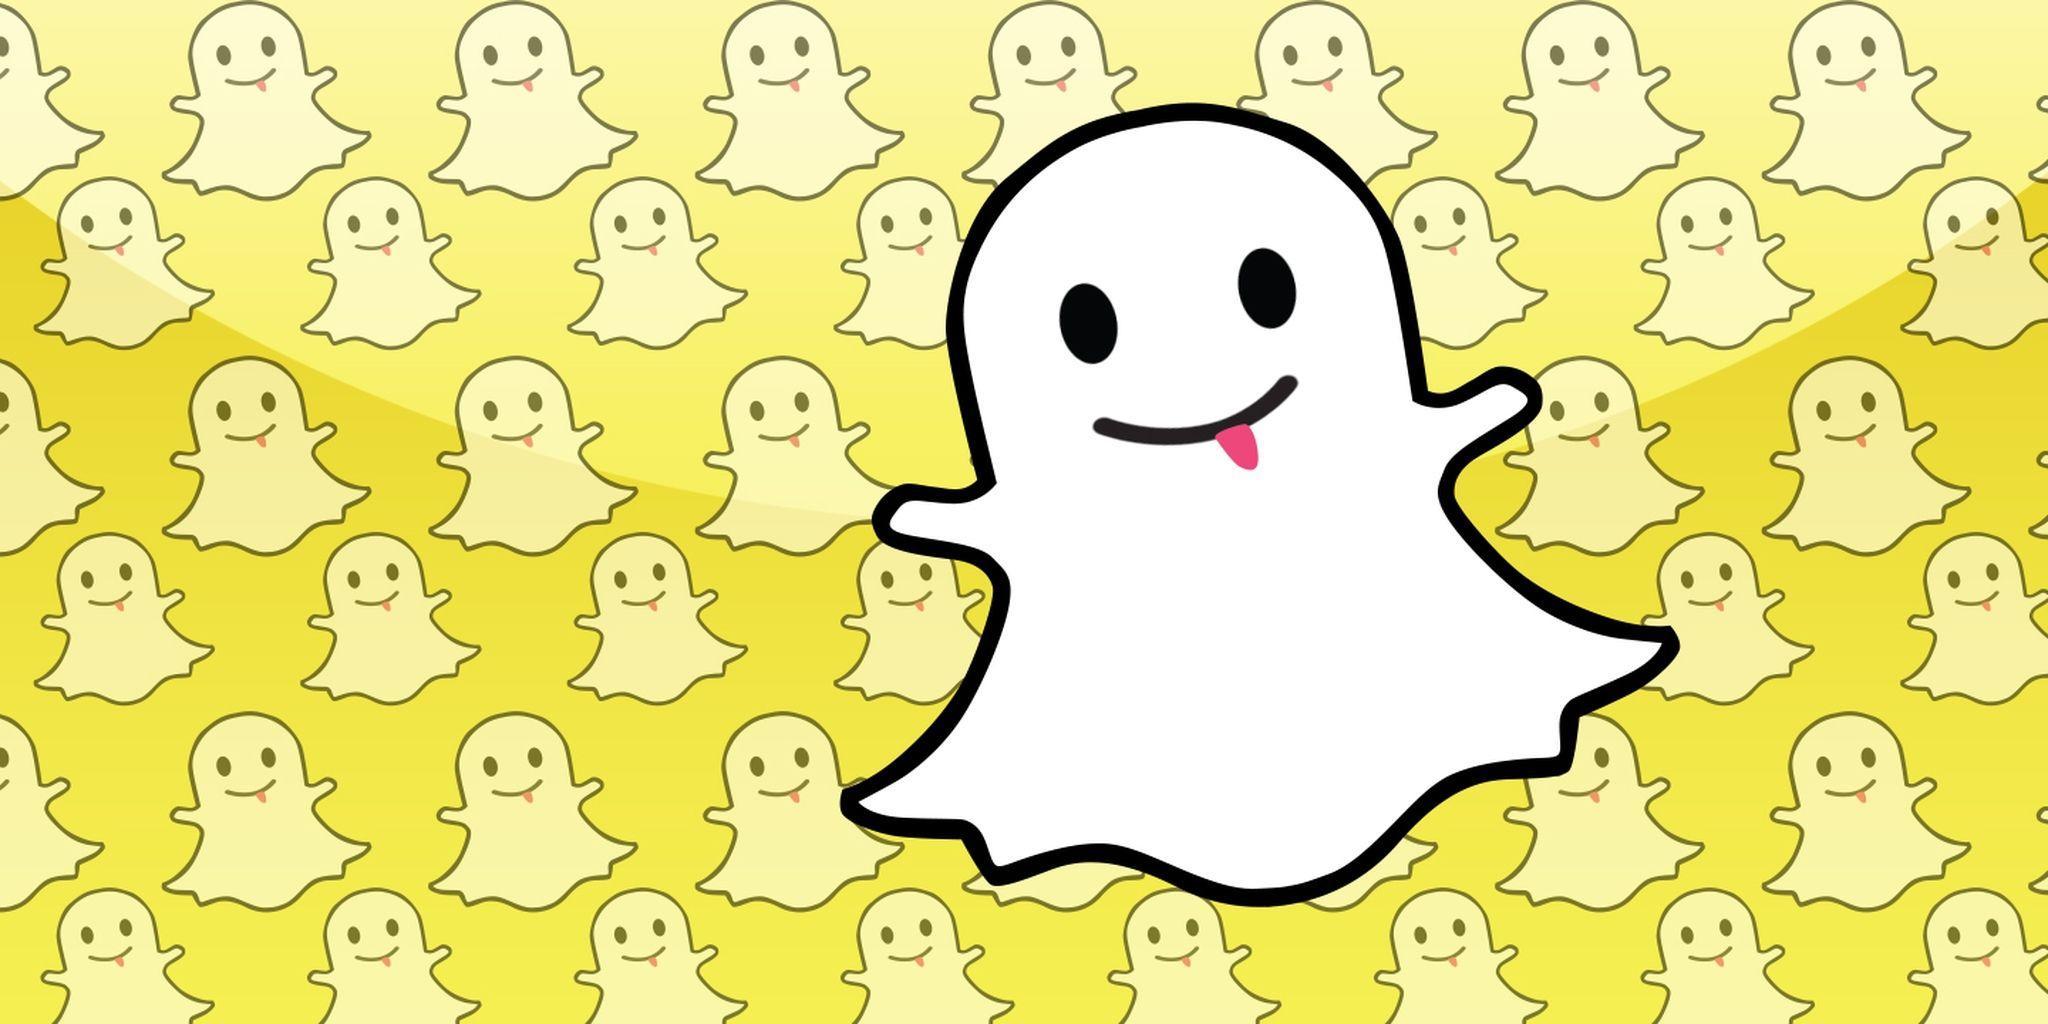 The Best Snapchat Hacks, Tips, Tricks, and Secret Functions